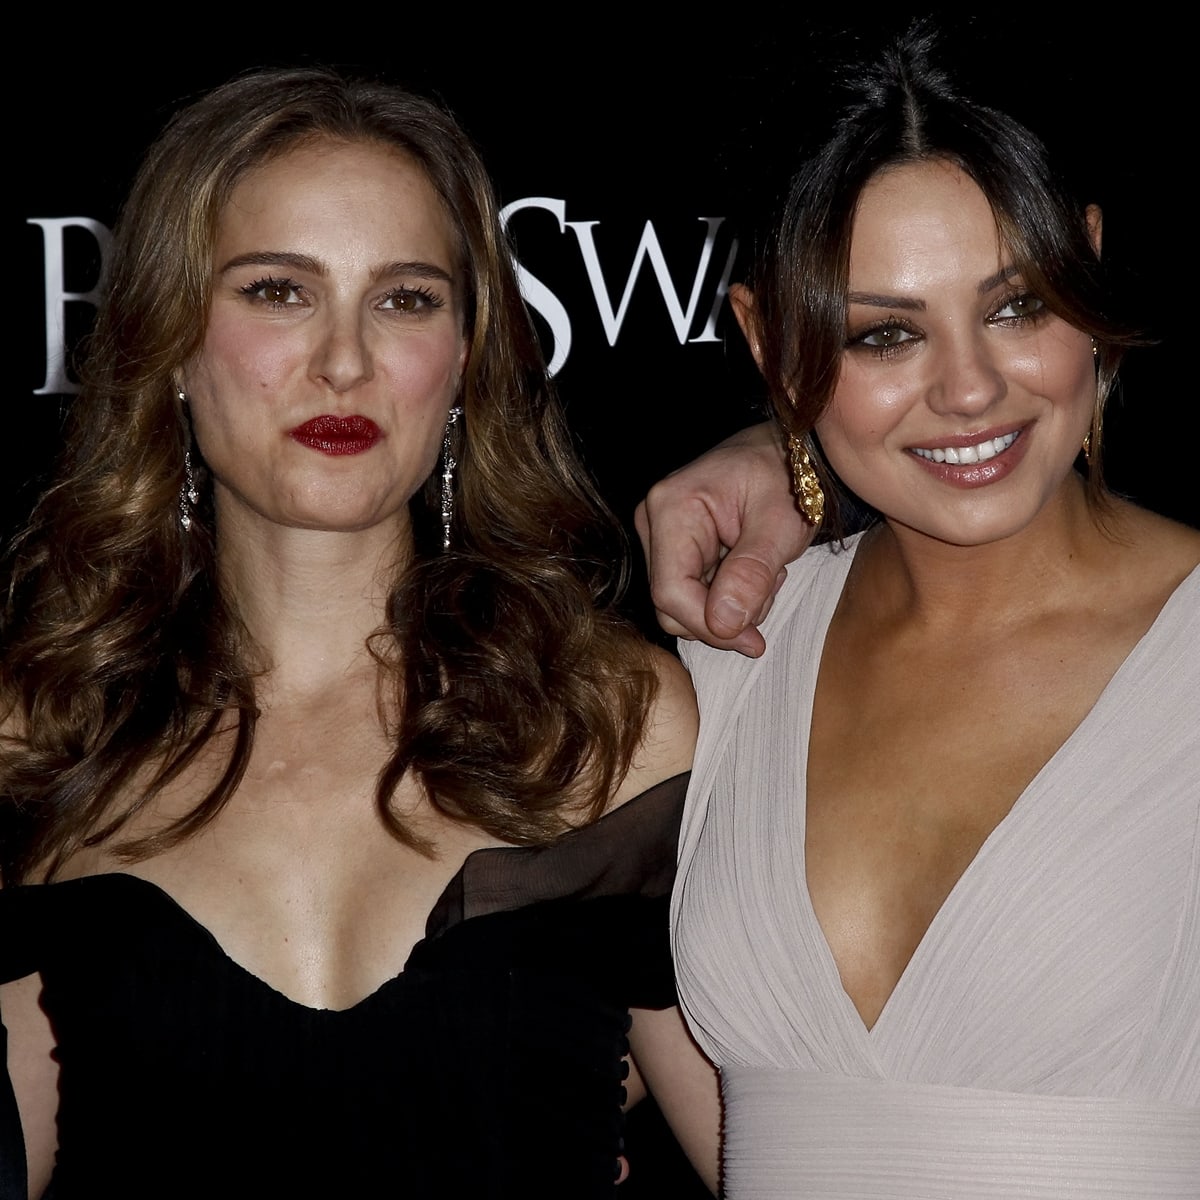 Natalie Portman as Nina Sayers/White Swan/Odette and Mila Kunis as Lily/Black Swan/Odile kiss and have a lesbian sex scene in the 2010 American psychological horror film Black Swan